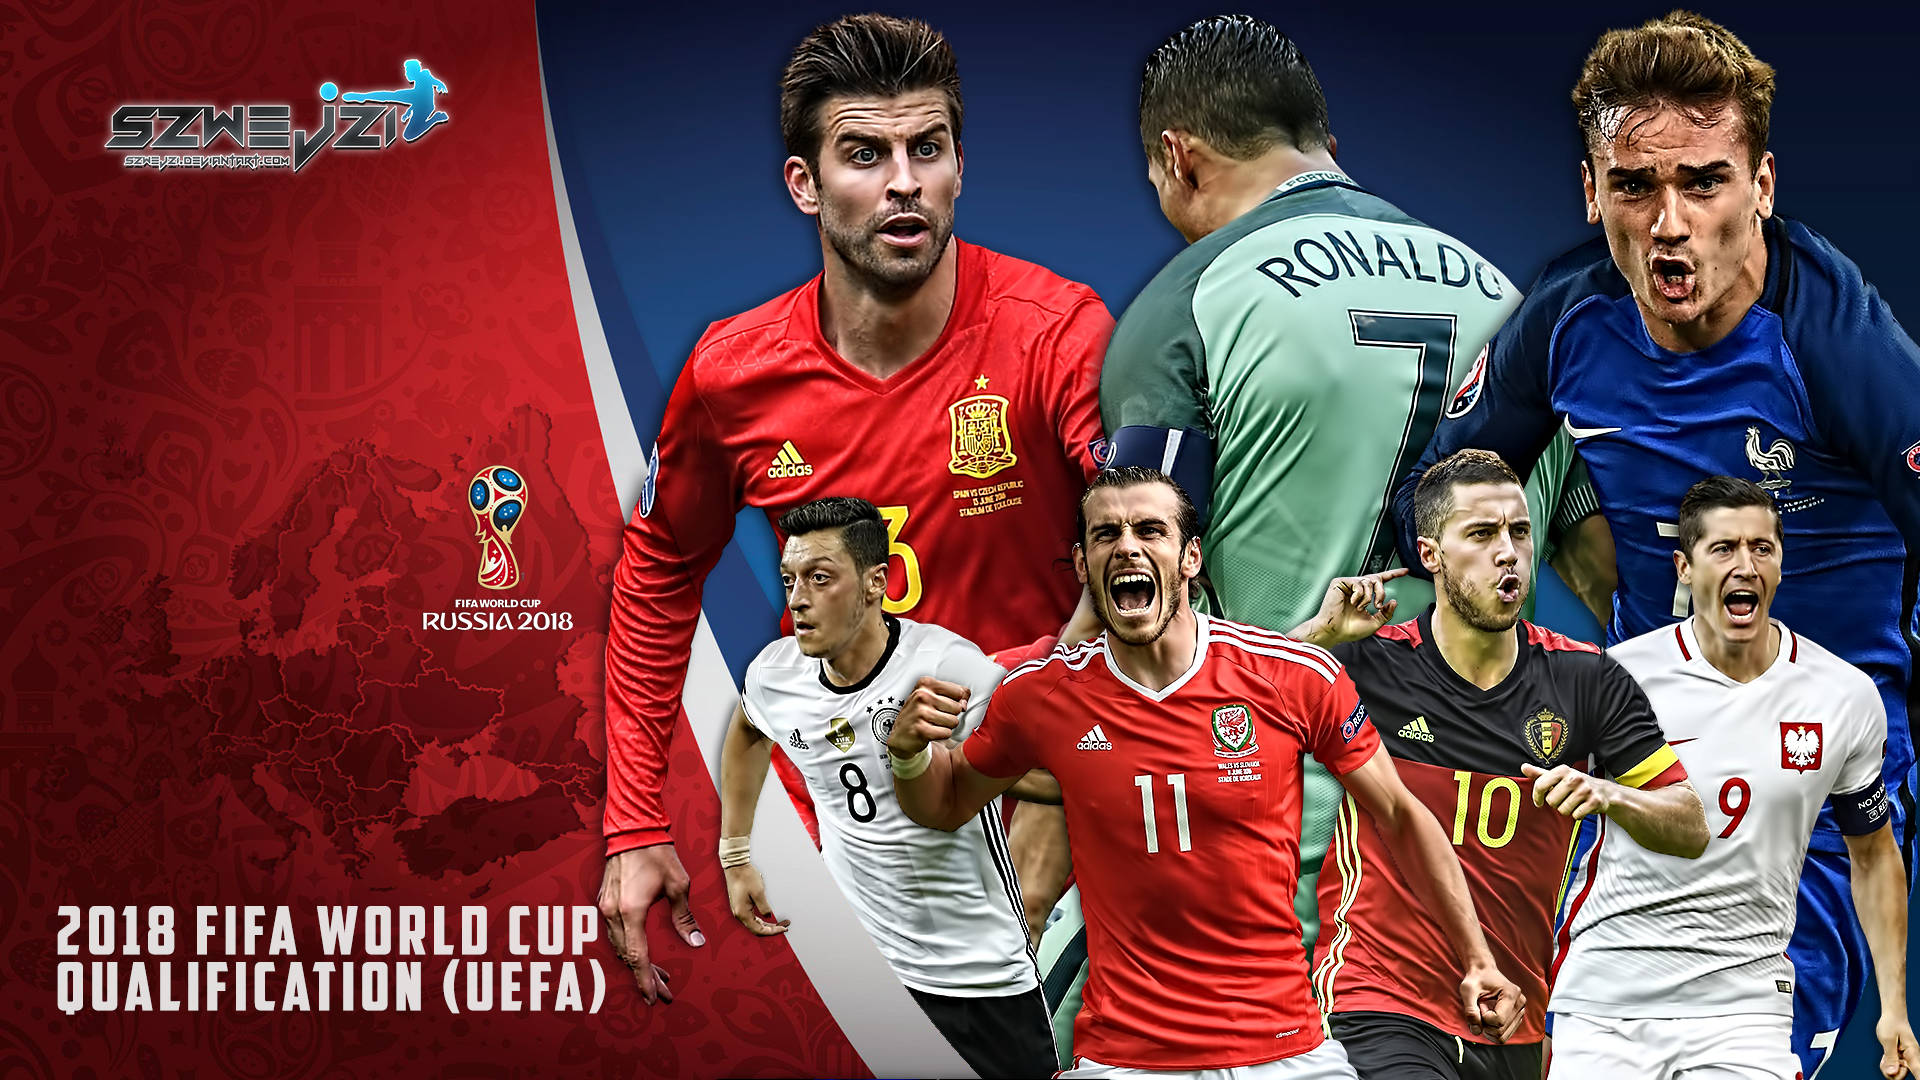 2018 Fifa World Cup Qualification Poster Background